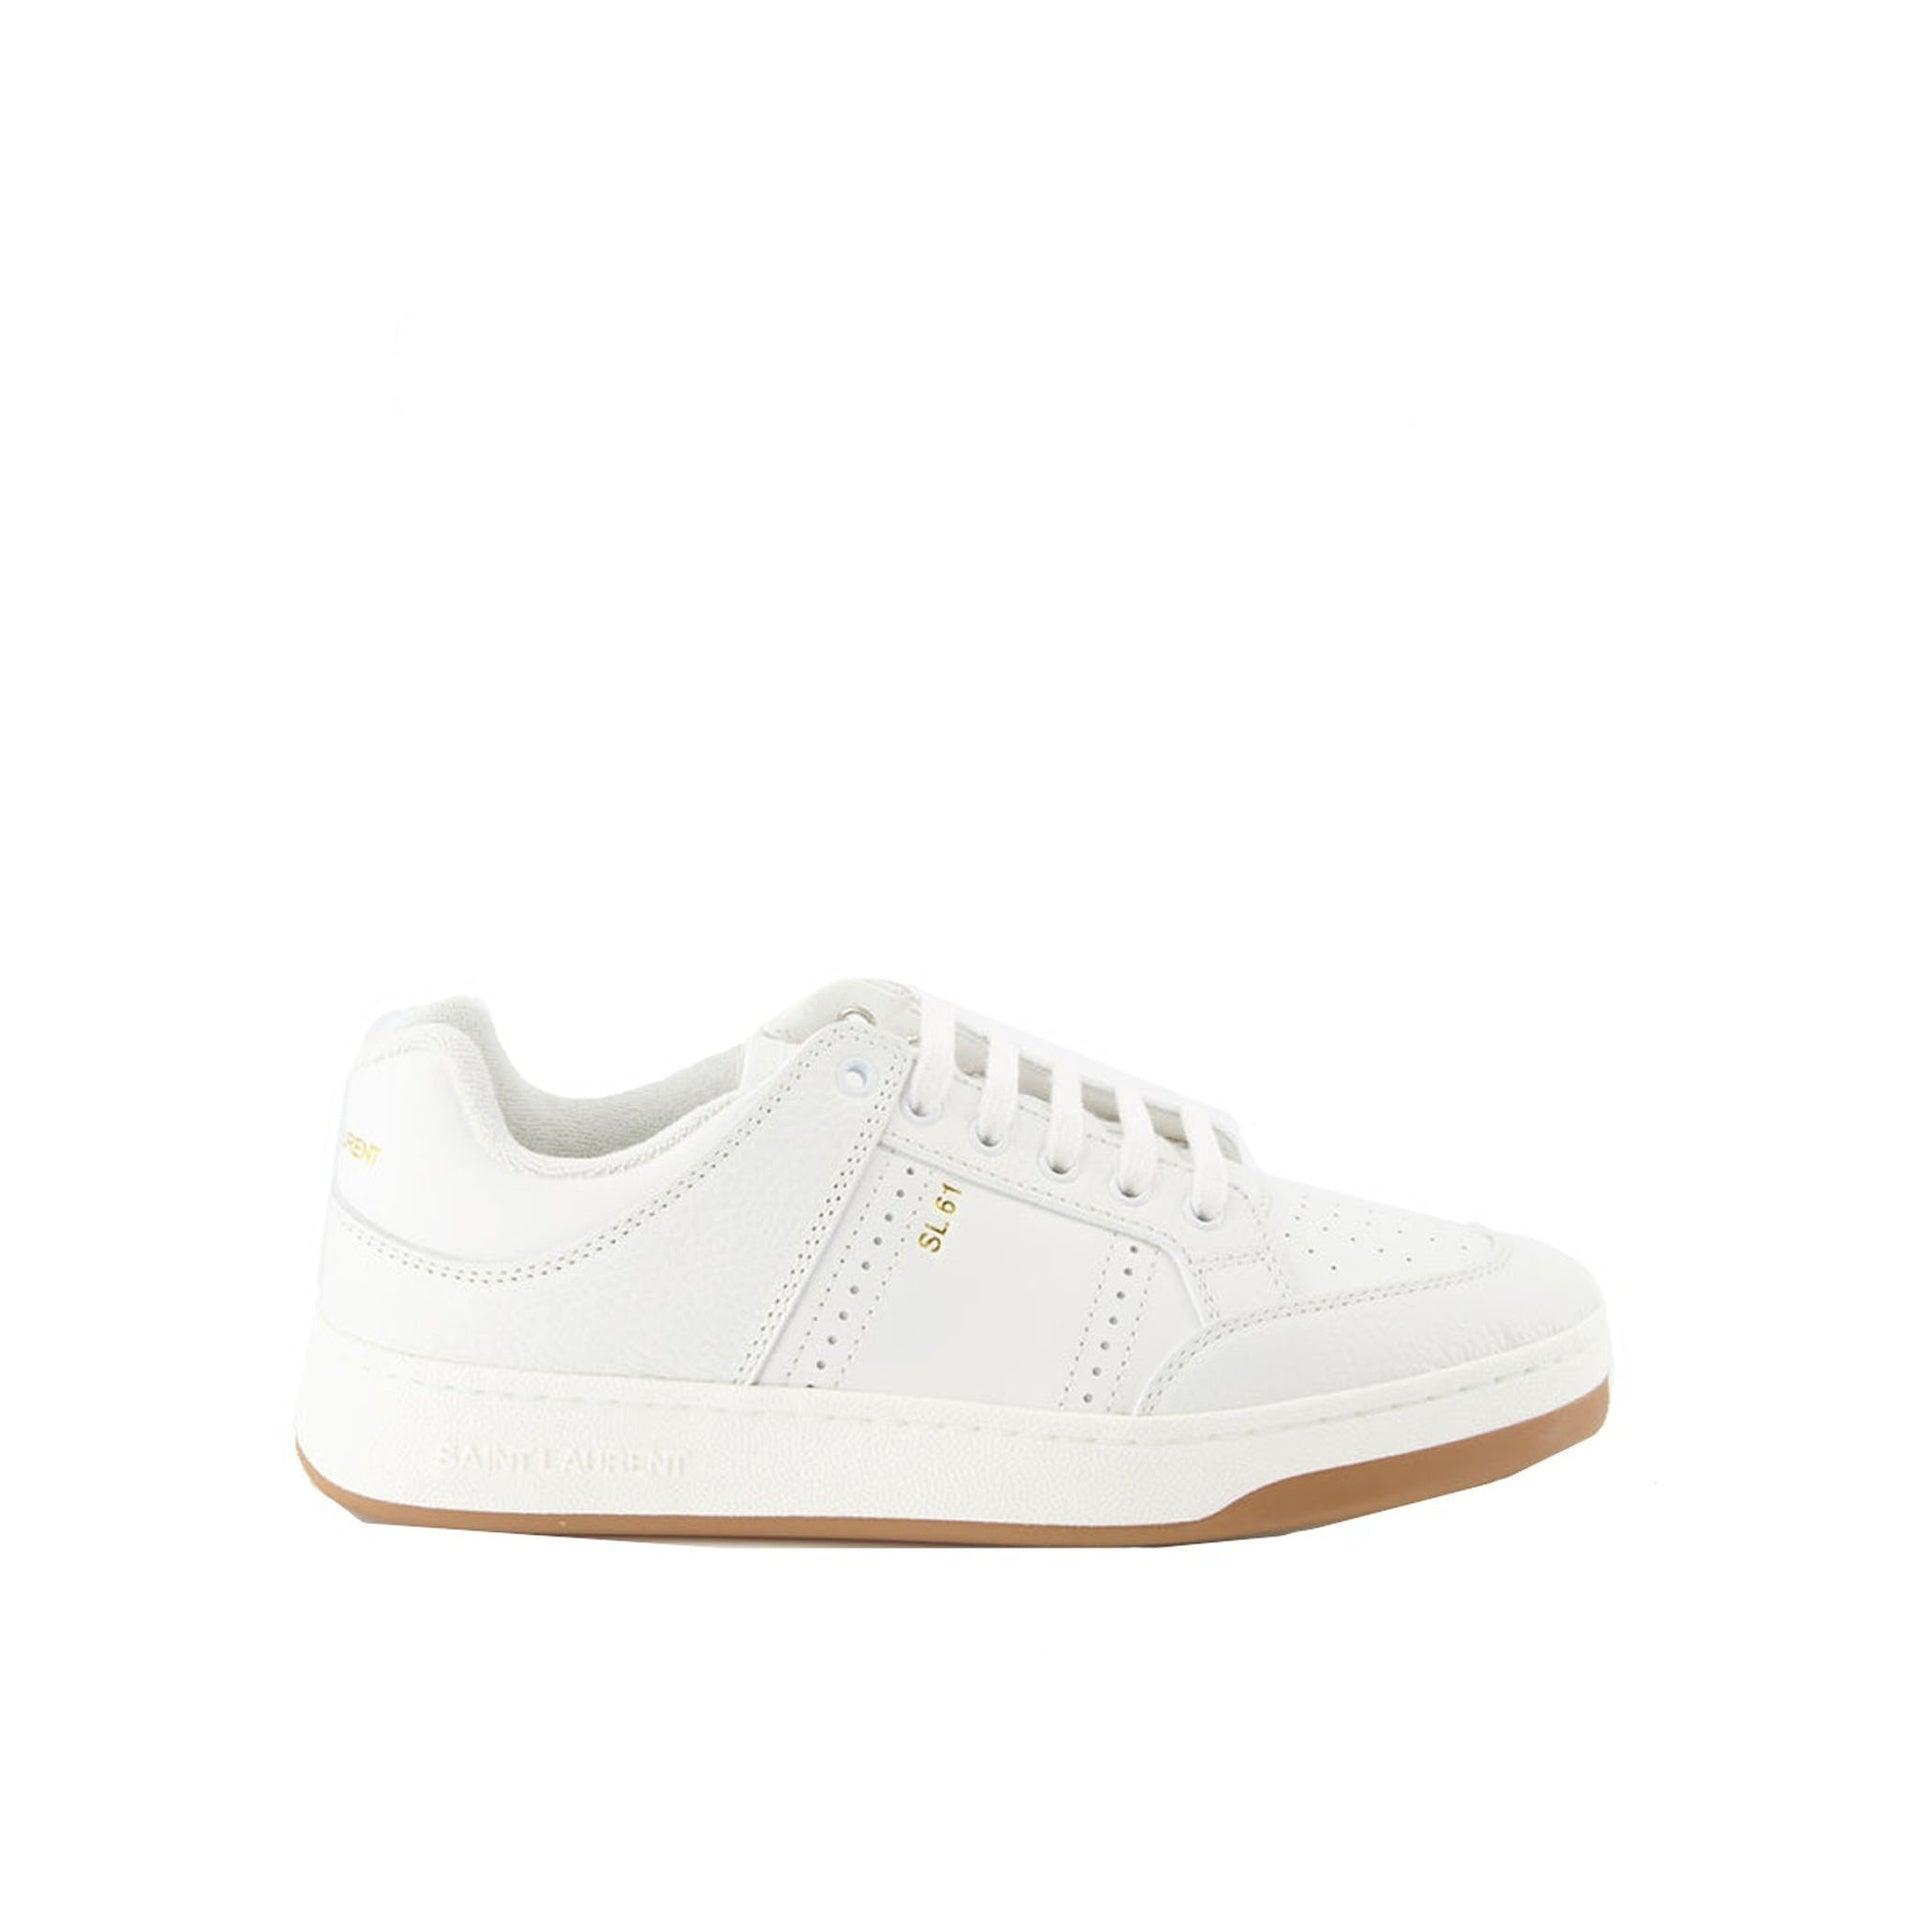 Saint Laurent Leather Sneakers in White for Men | Lyst